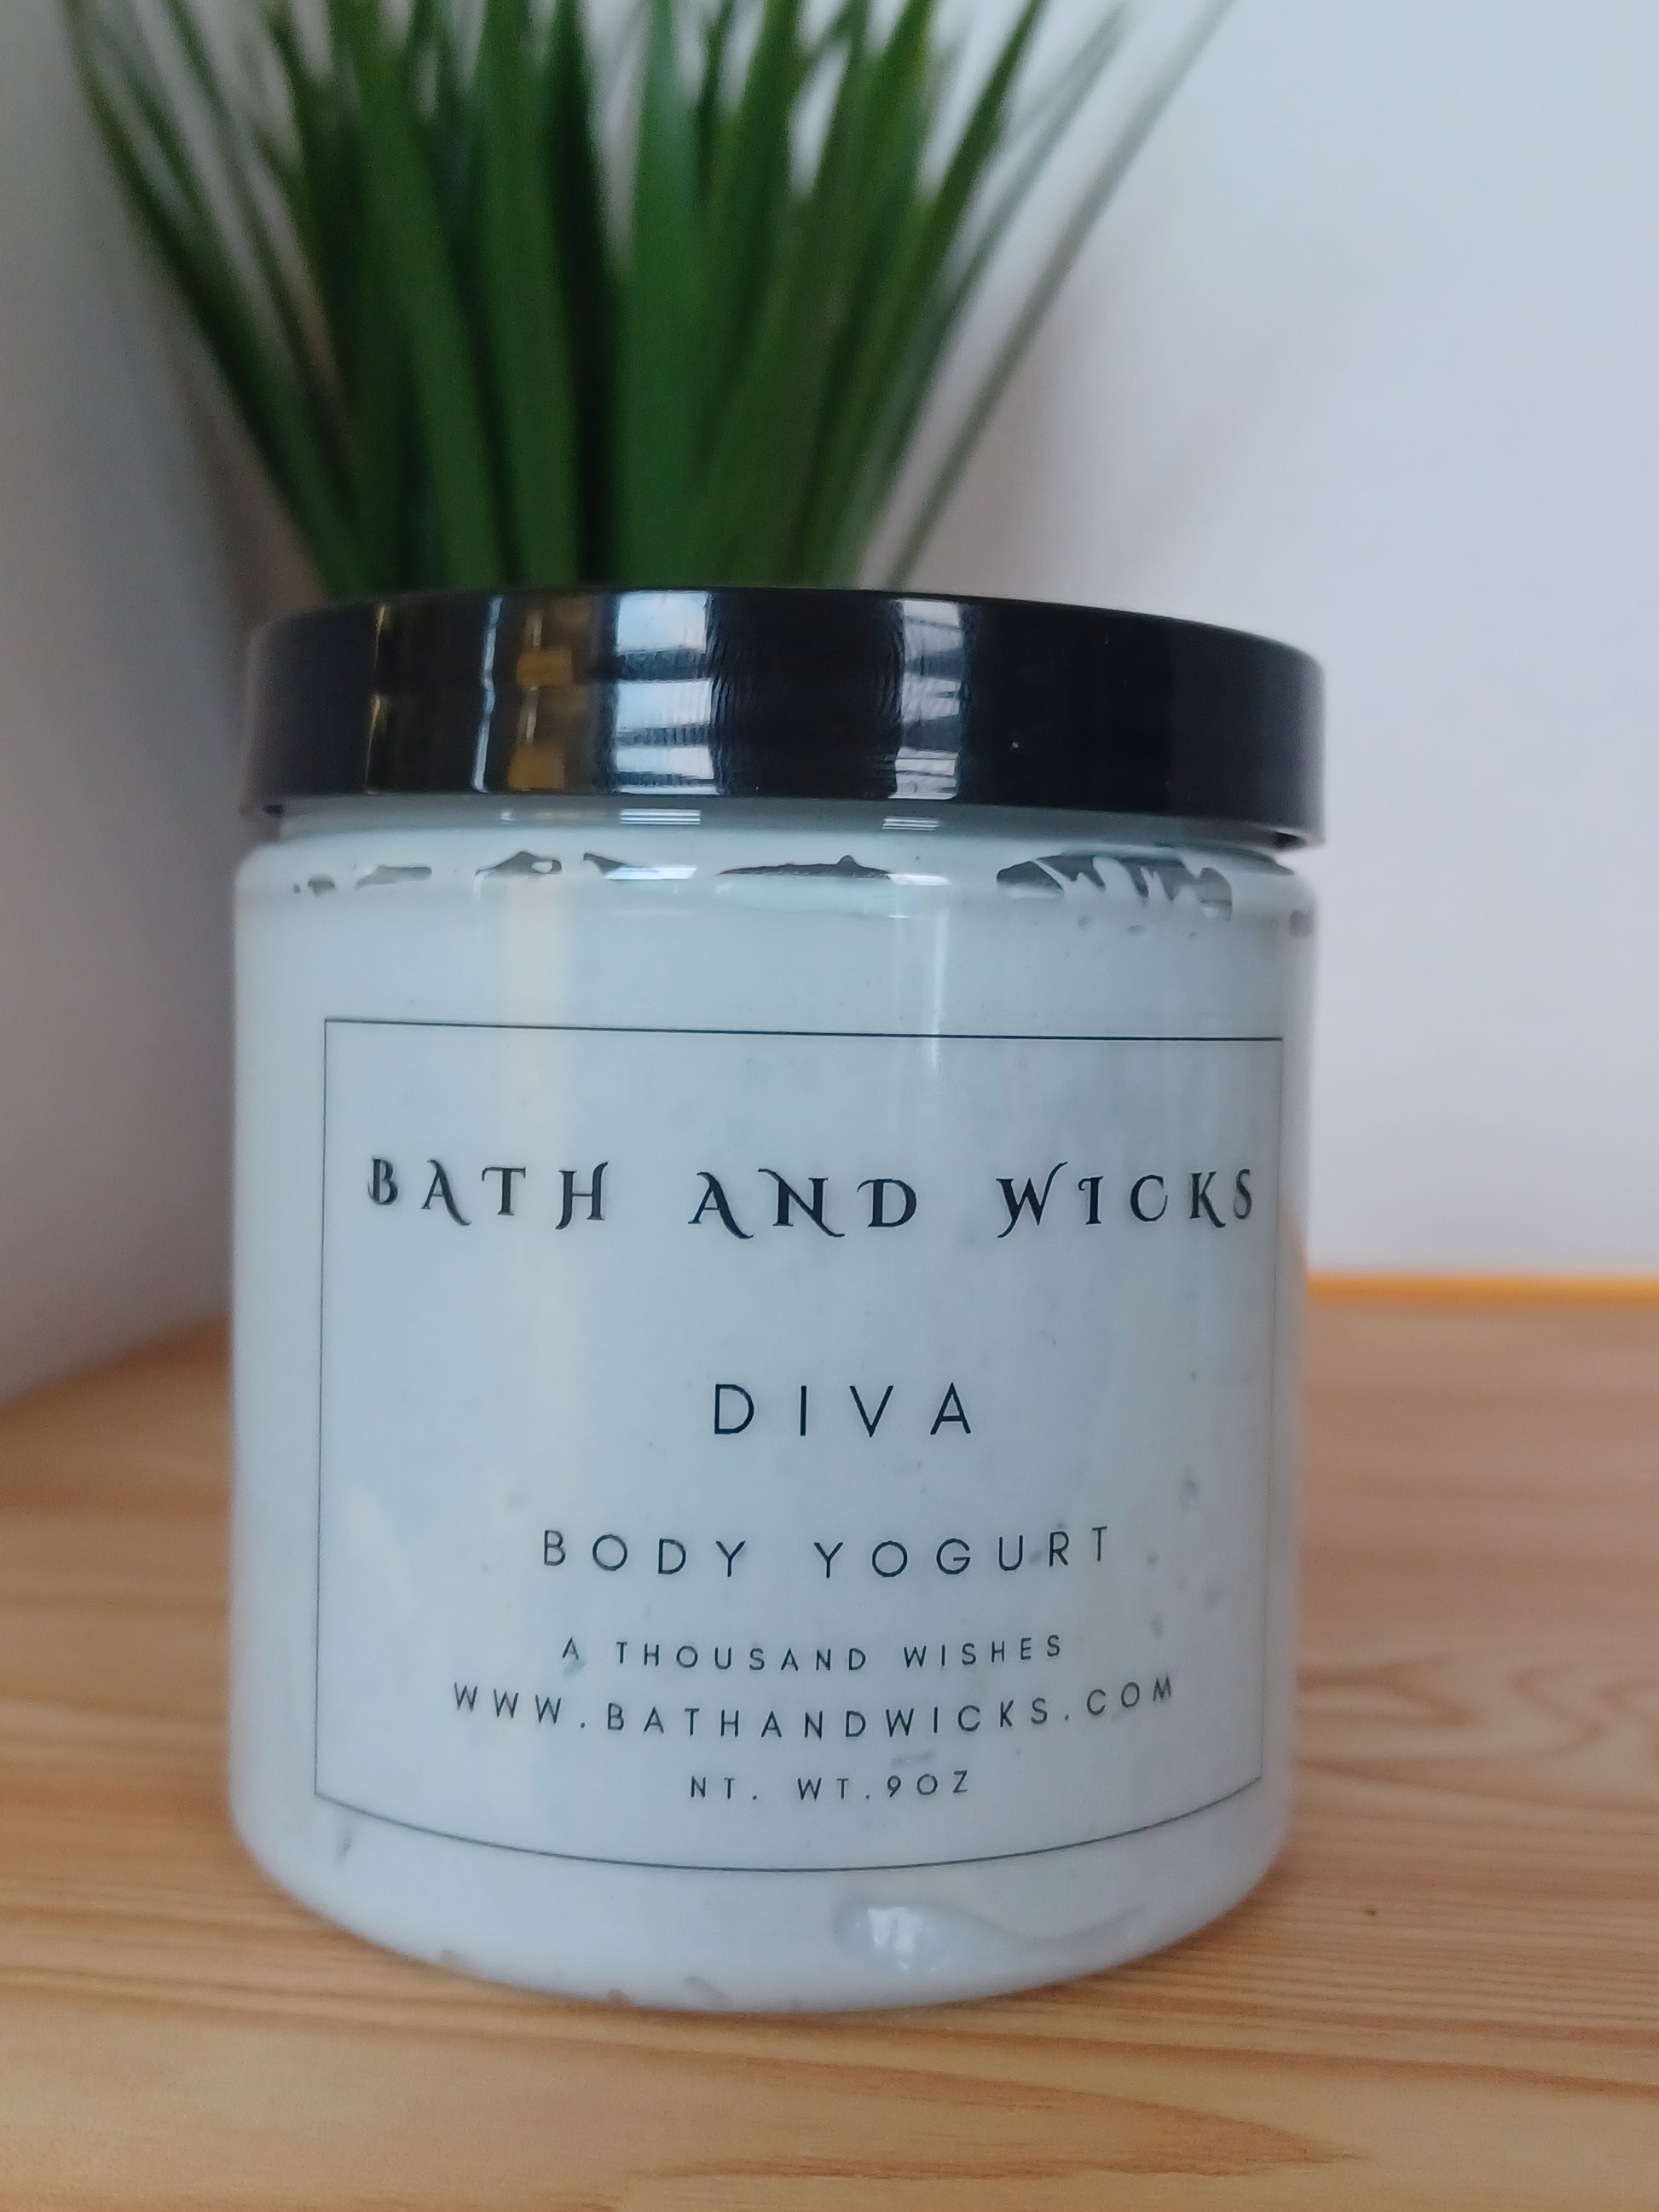 Luxurious thick and creamy body yogurt. This one is colored with a very nice light blue and is scented with A Thousand Wishes fragrance oil.